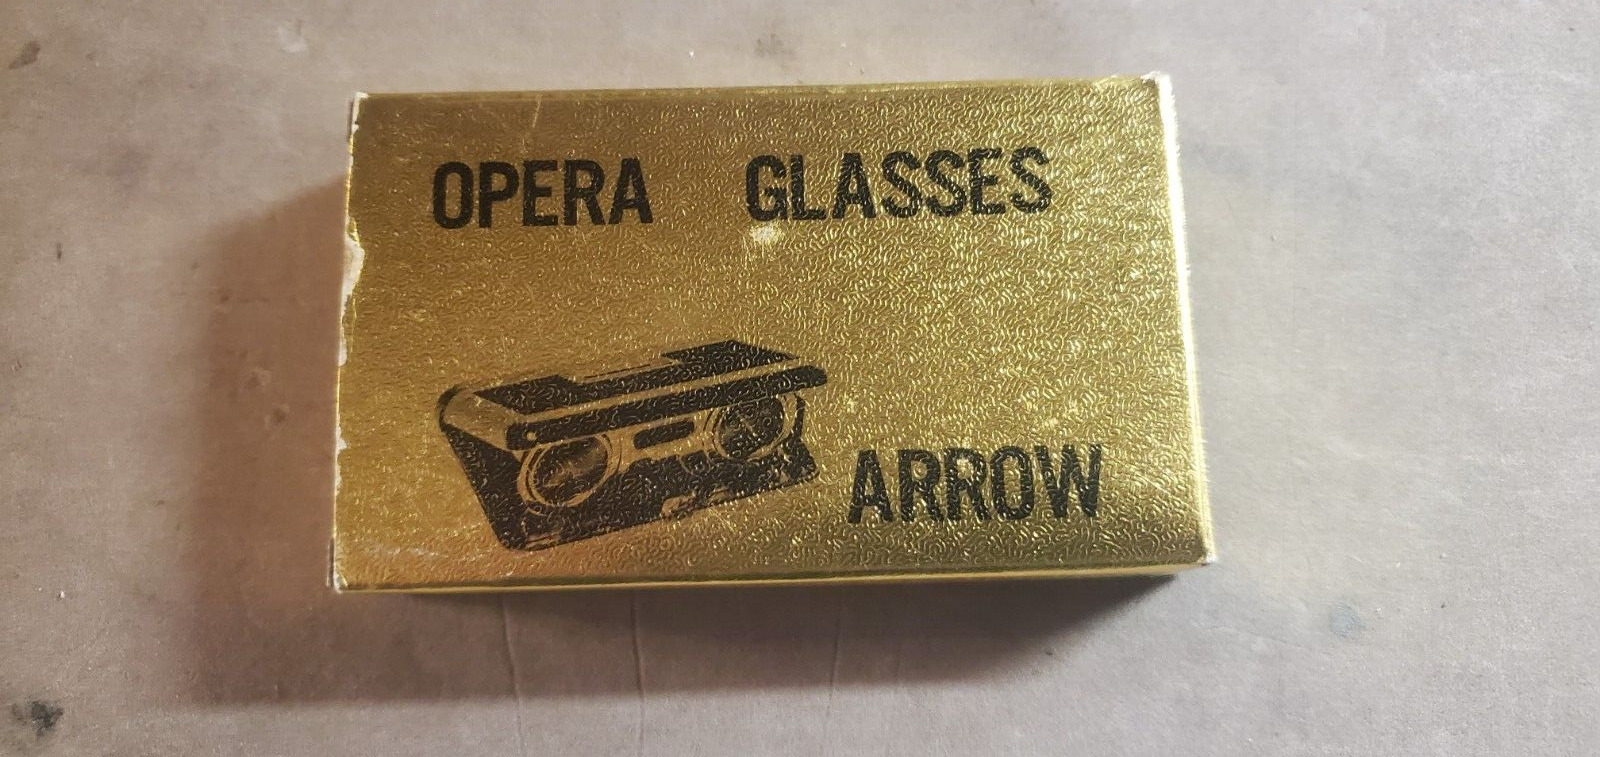 Arrow Red Opera Glasses With Box Crystal Lens 2.5x Binoculars Made In Japan